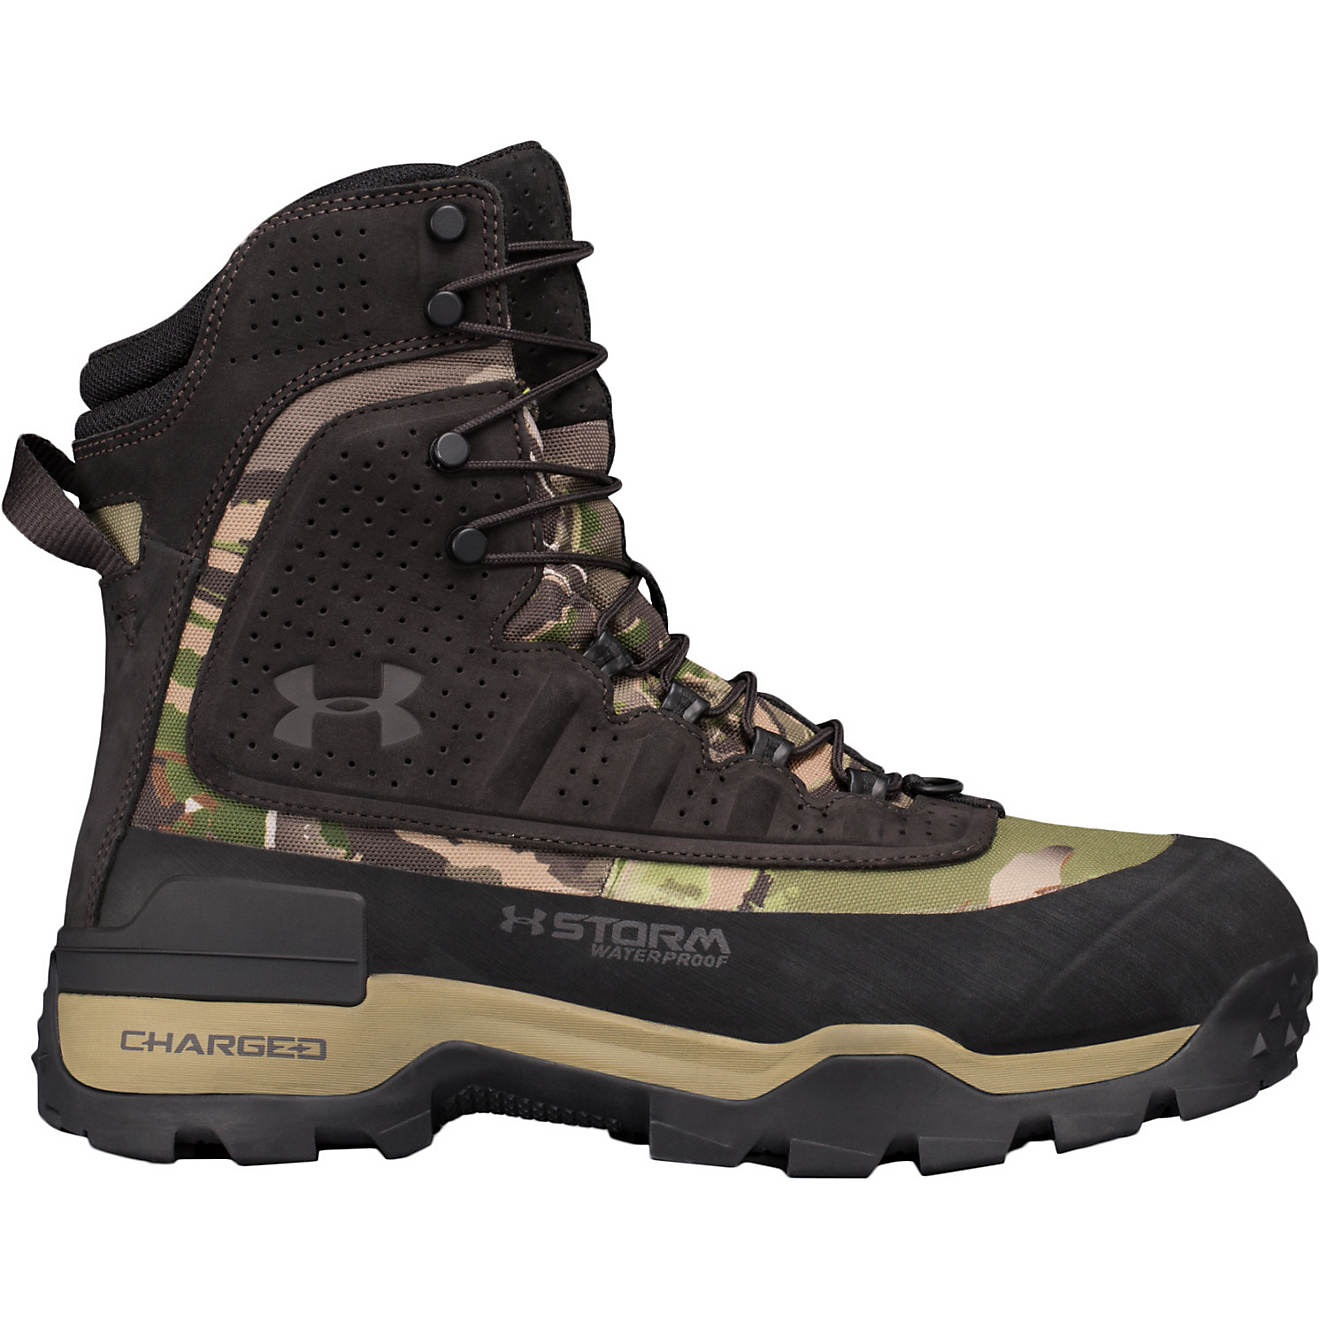 Under Armour Brow Tine 800 Hunting Hiking Boots 1240080-946 Man US 10.5 NEW $200 